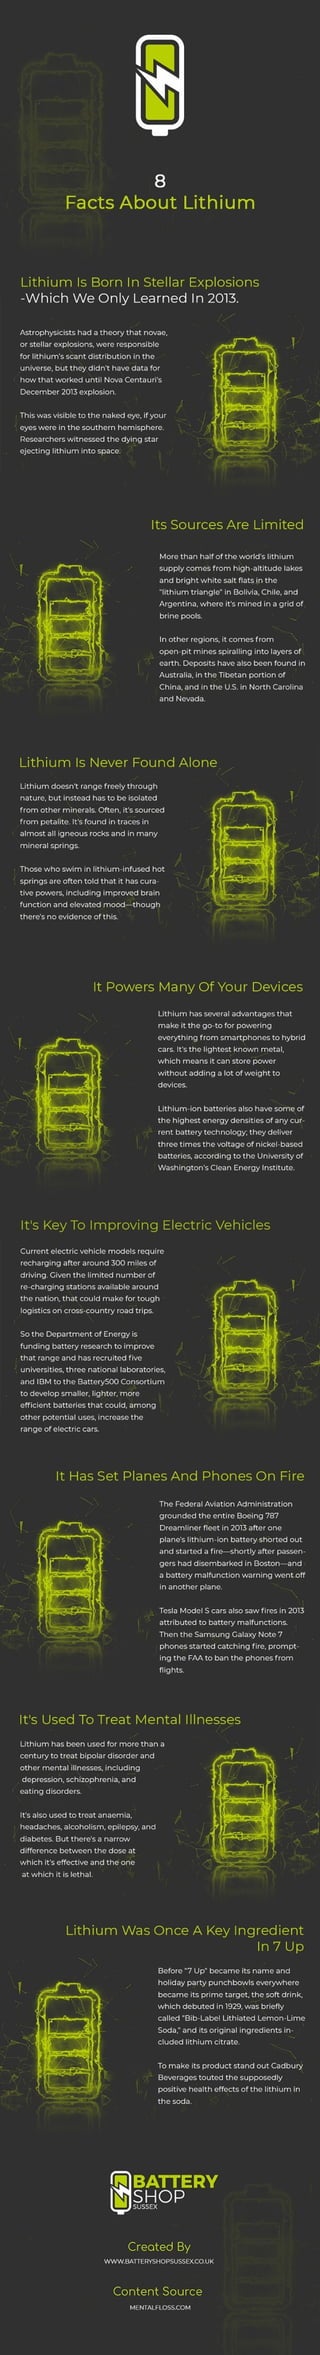 8 facts about lithium